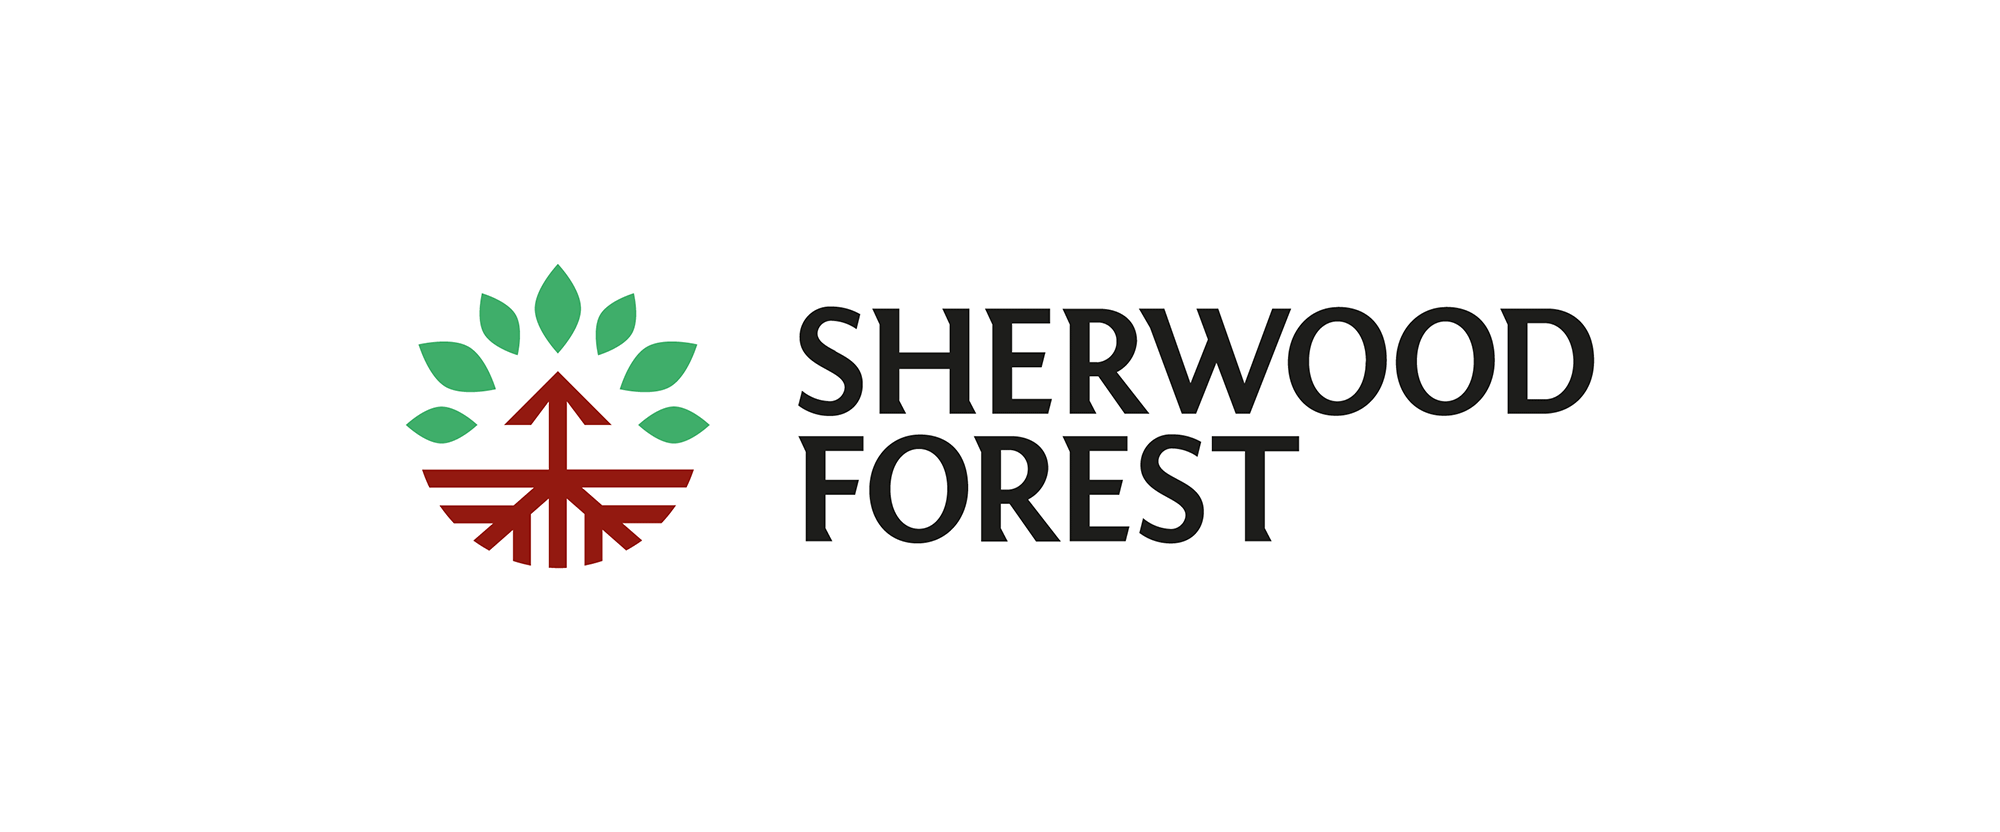 Steal Logo - Brand New: New Logo and Identity for Sherwood Forest by Cafeteria